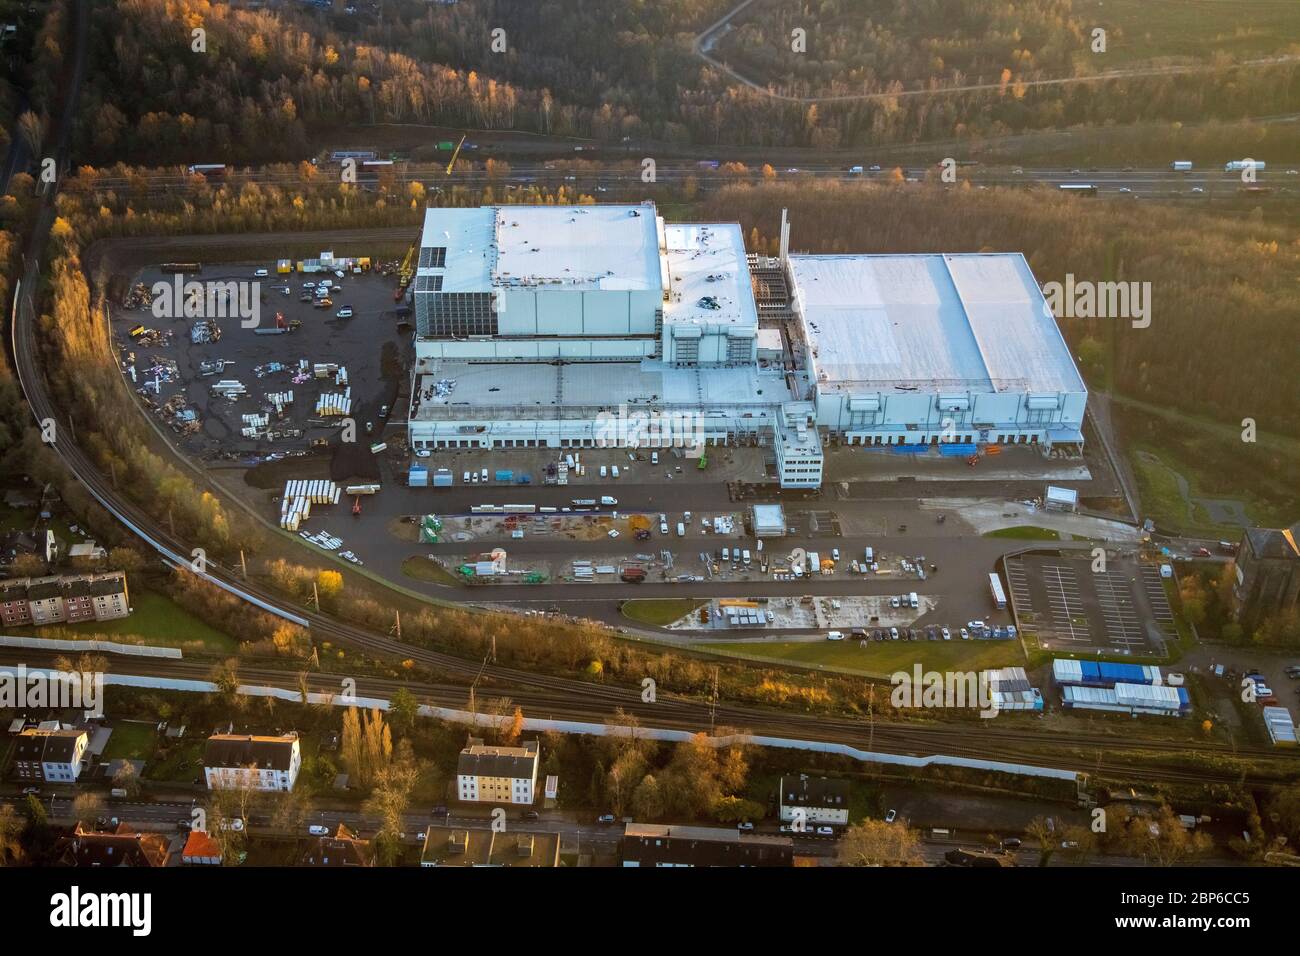 Aerial view, frozen logistics company Nordfrost, located in Unser Fritz Herne, Herne, Ruhr area, North Rhine-Westphalia, Germany Stock Photo